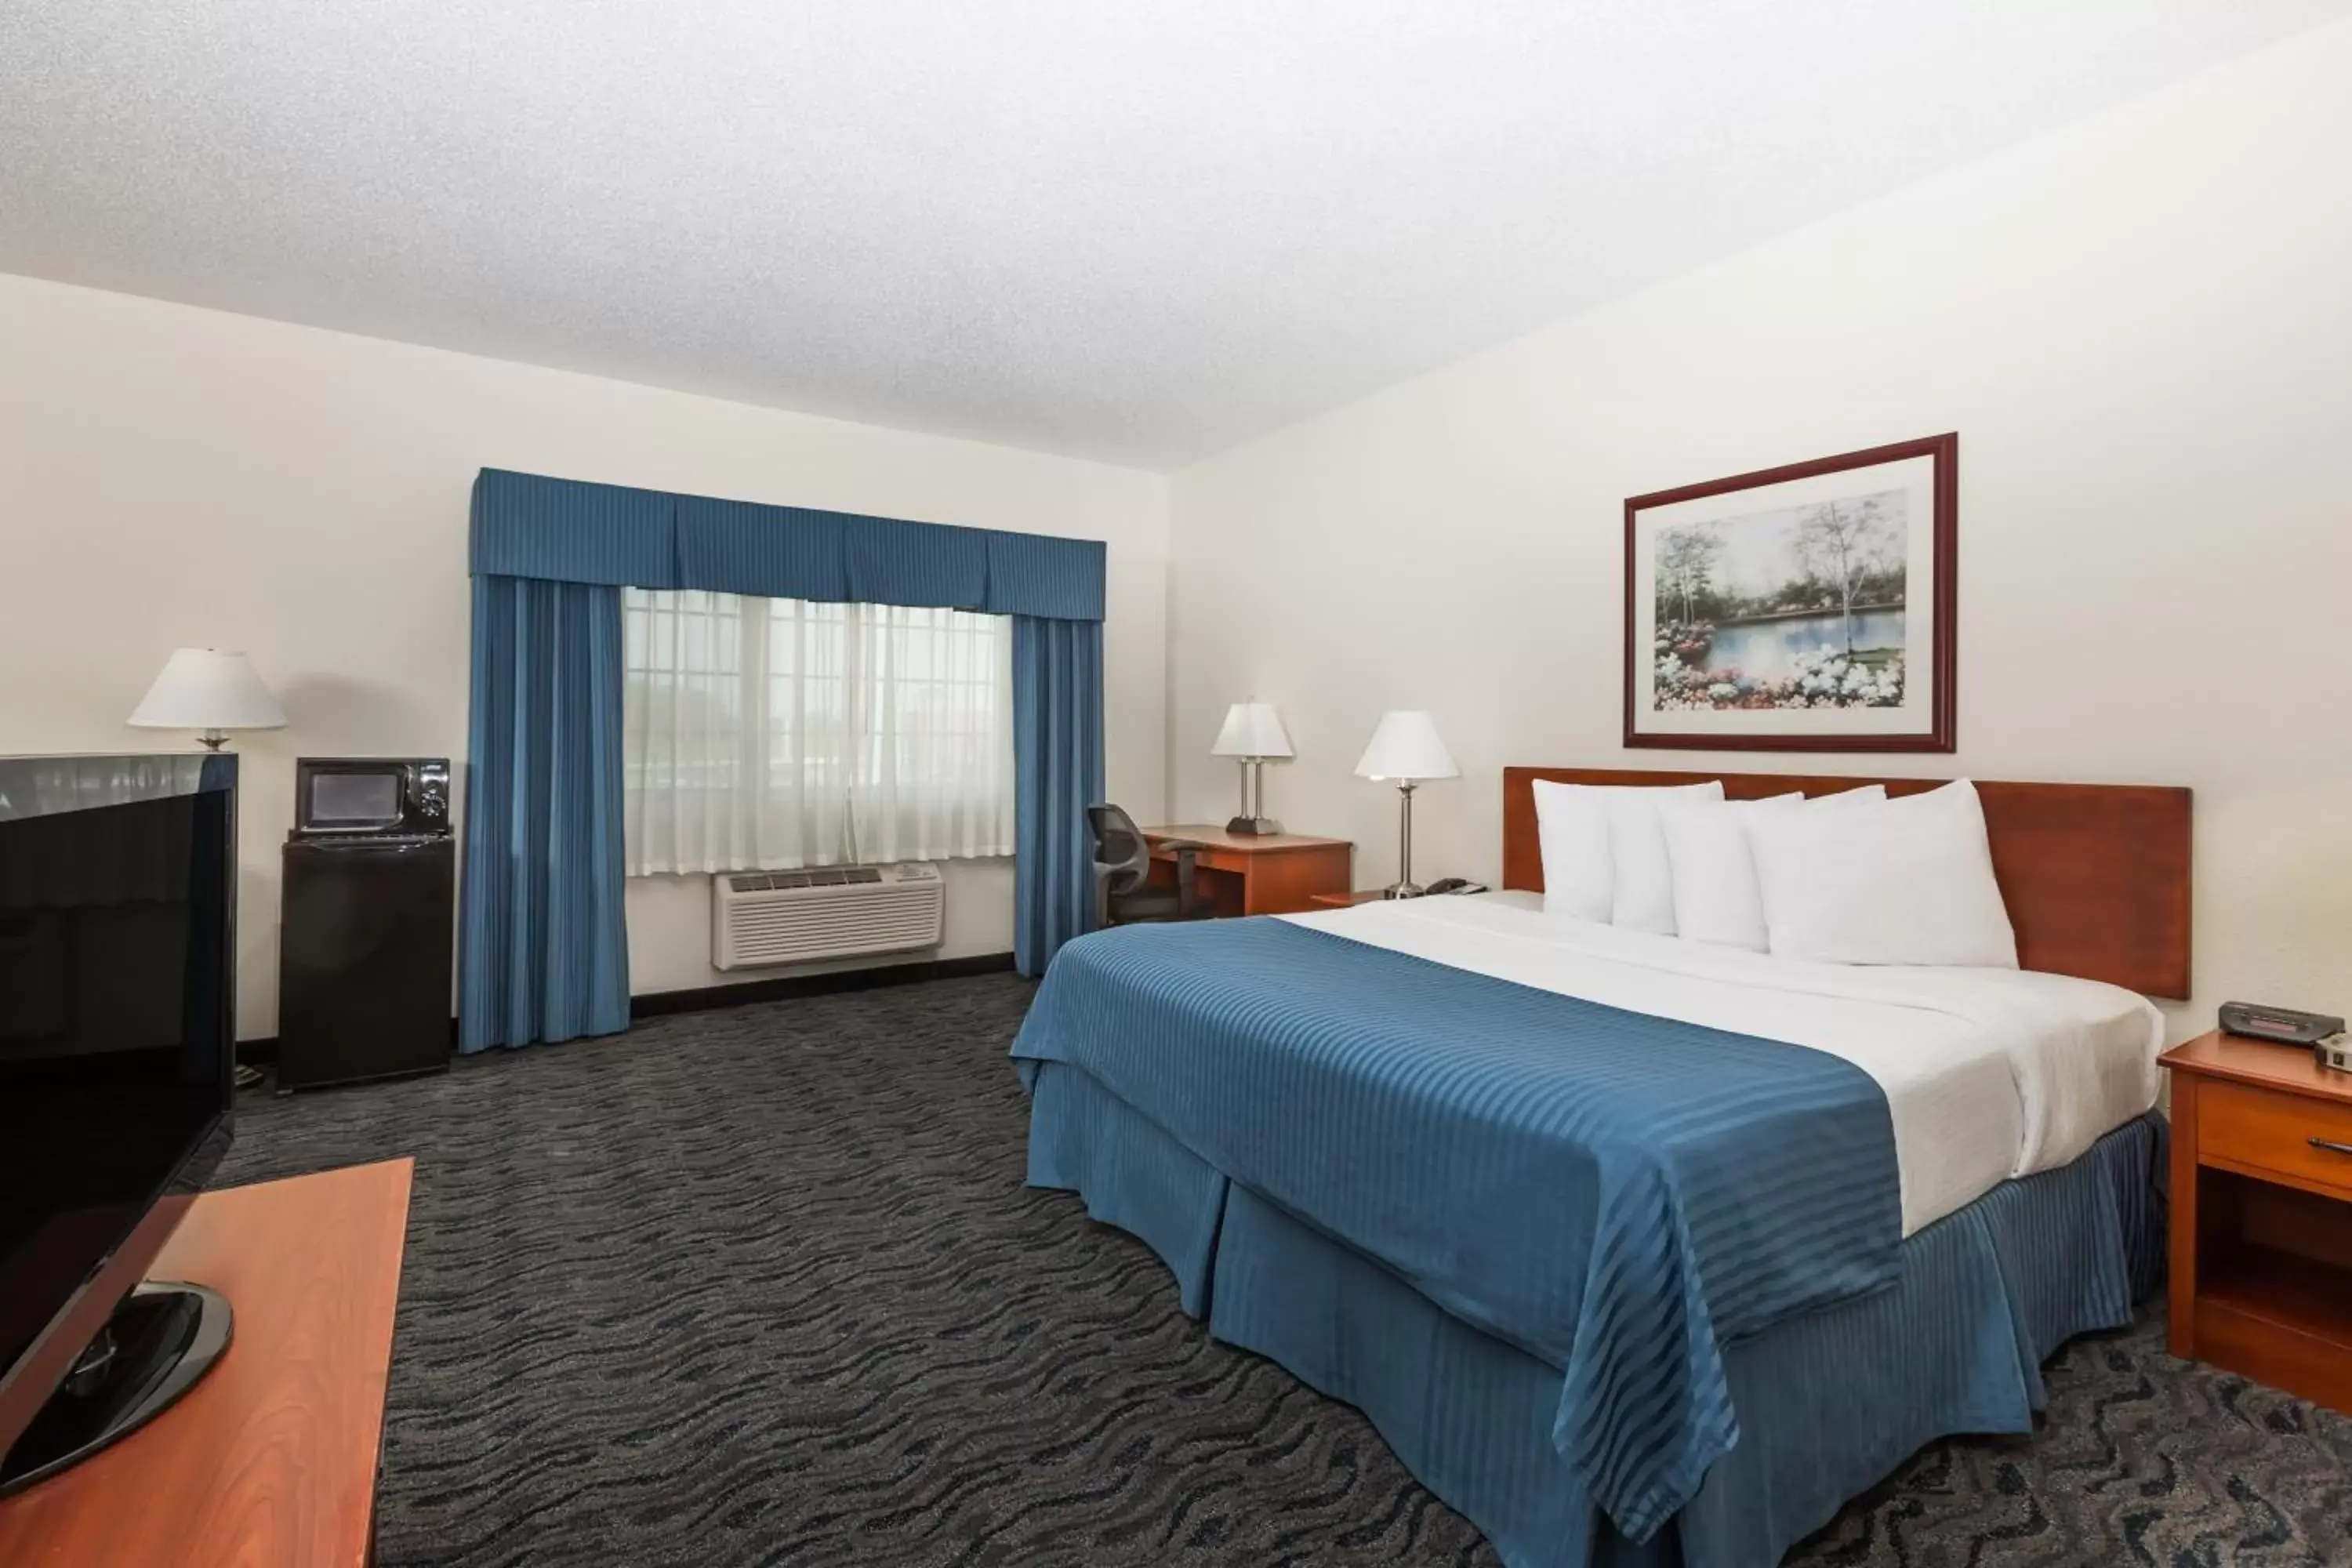 TV and multimedia, Room Photo in Baymont by Wyndham Des Moines Airport